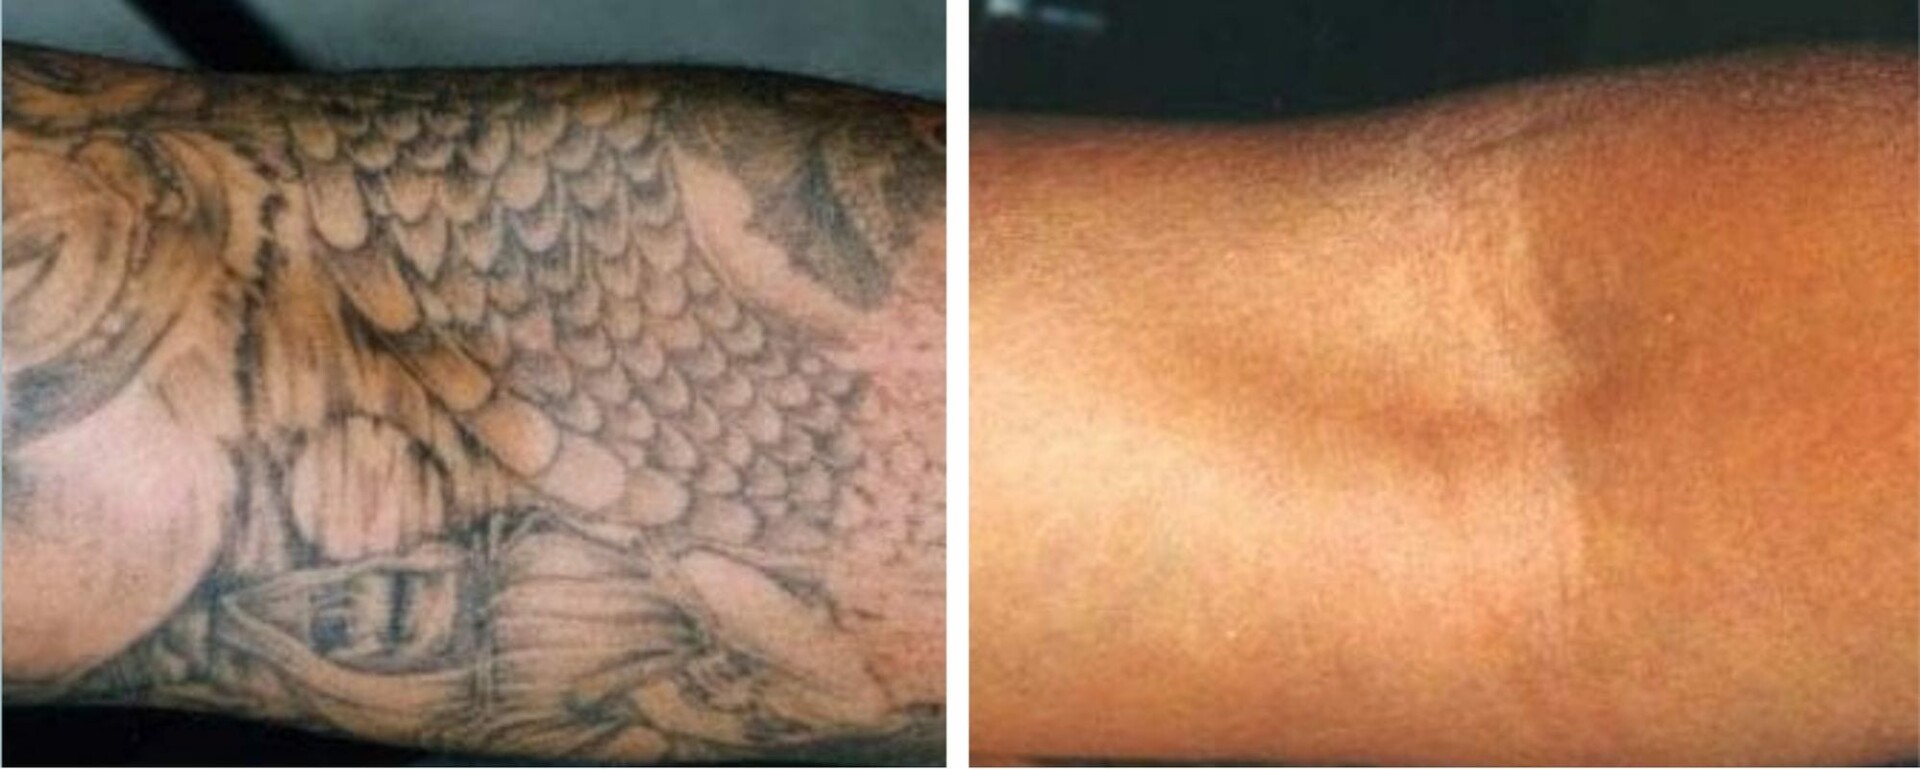 Laser tattoo removal: price, pain and before and after photos